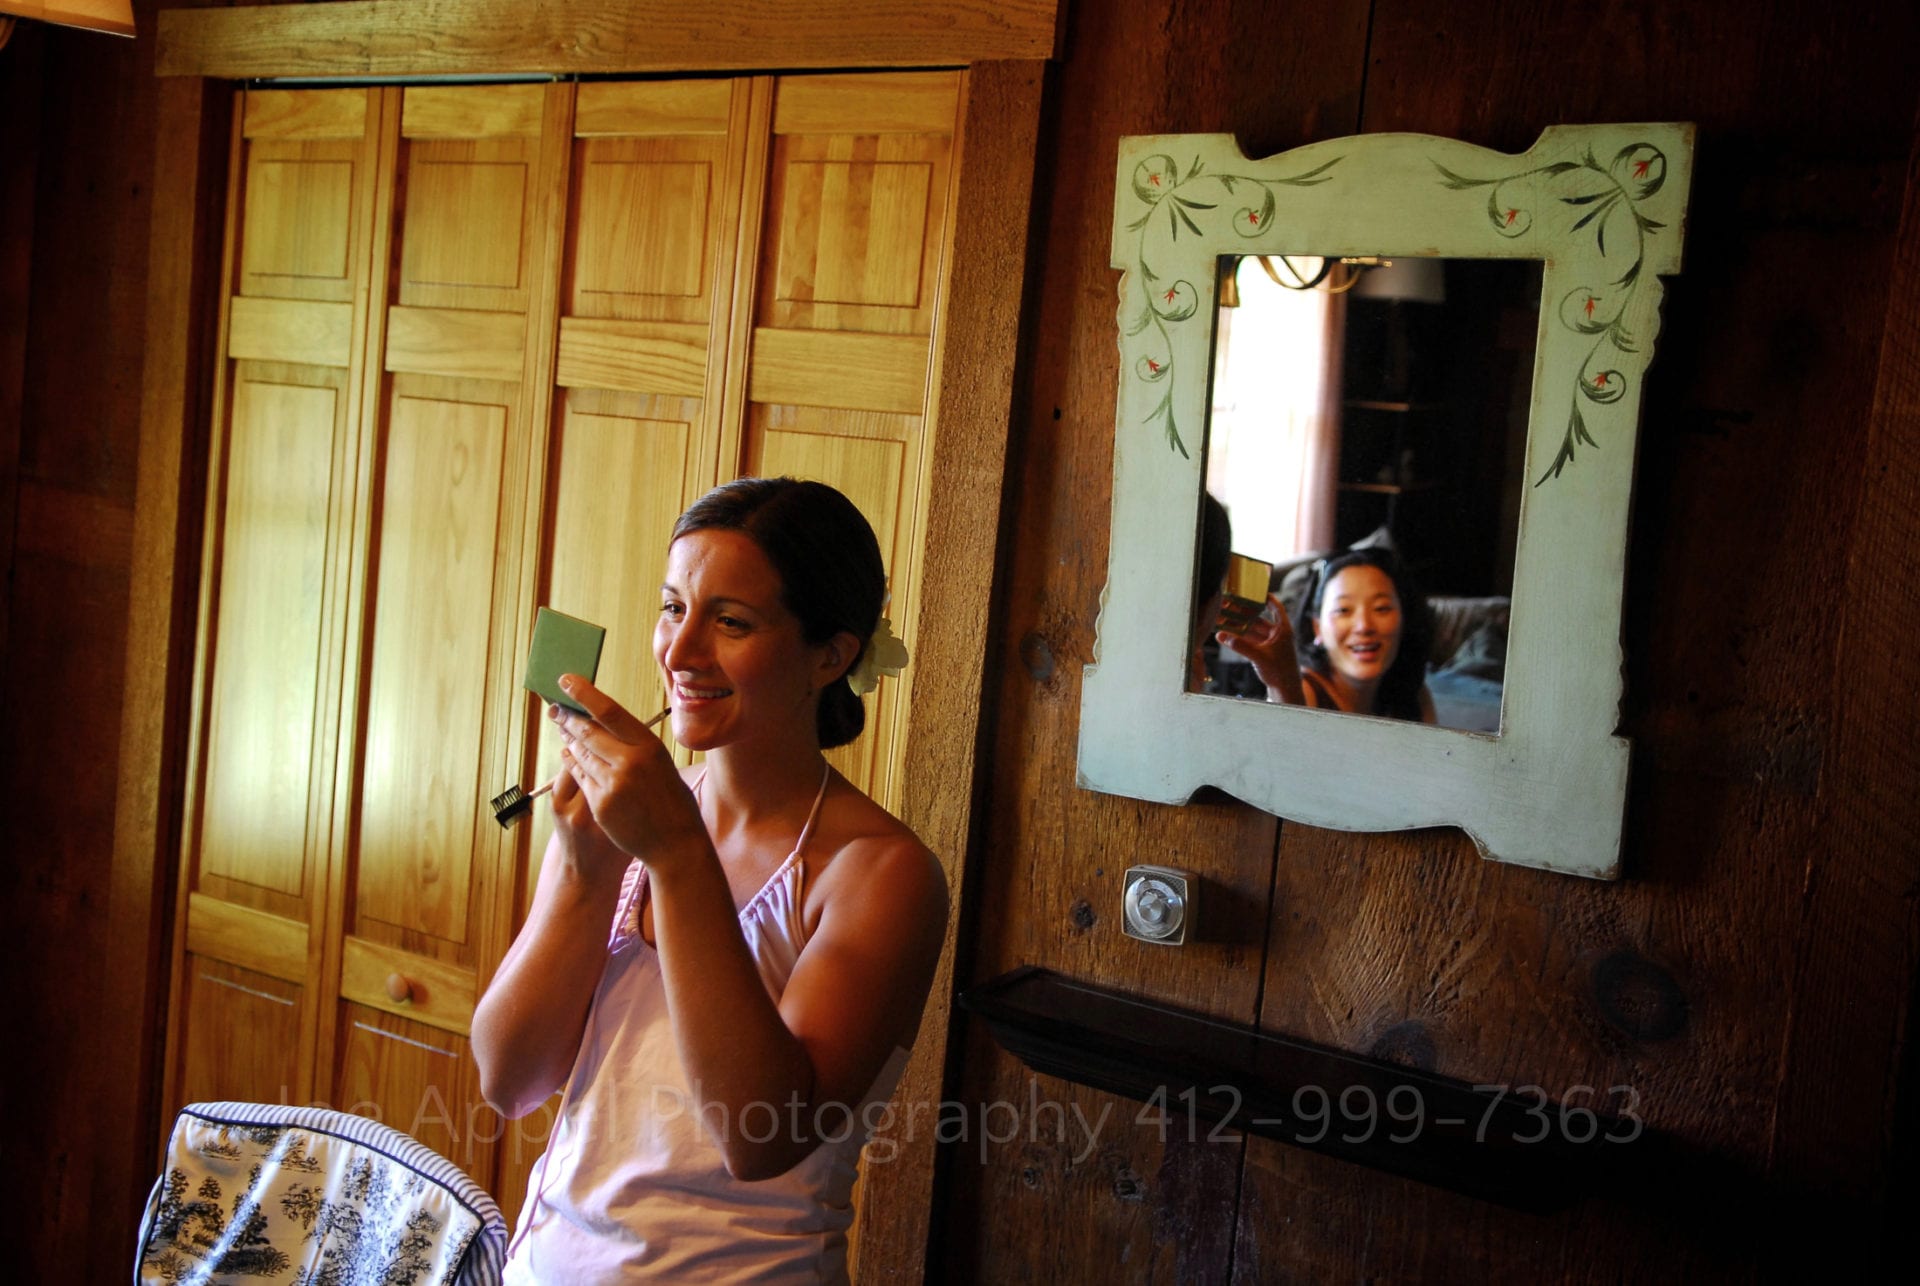 a bride applies lipstick while looking at herself in a compact. Another woman is reflected in the mirror behind her. Armstrong Farms Weddings